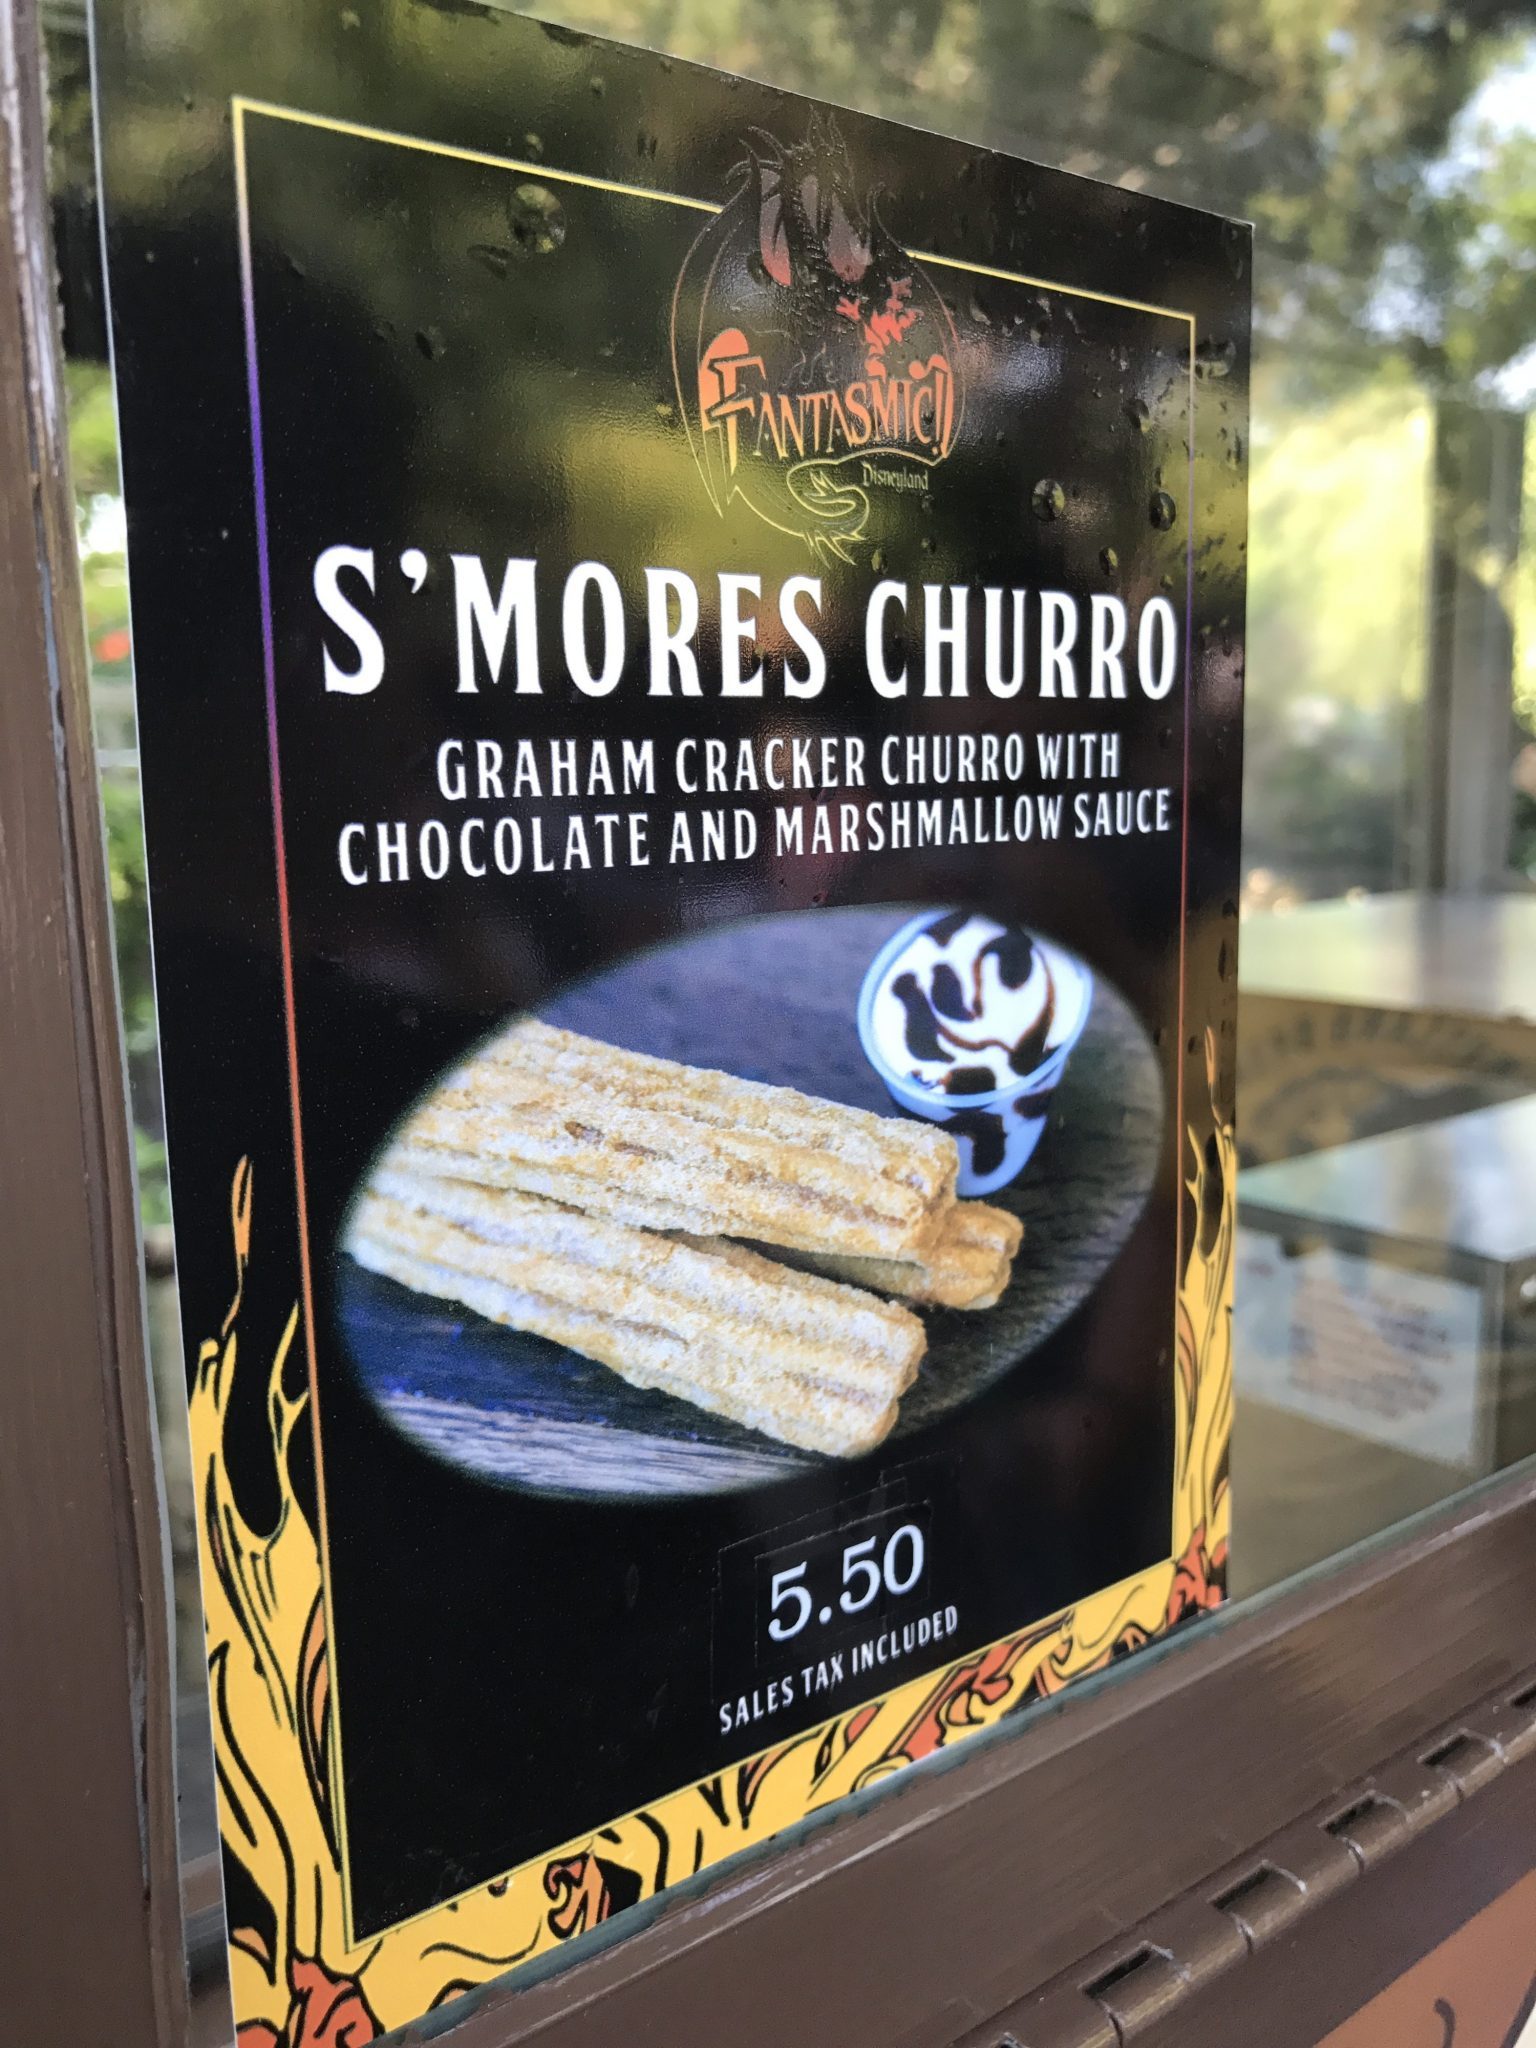 Fantasmic Blackberry Beignets and S’Mores Churro – Treats to Celebrate a Great Show